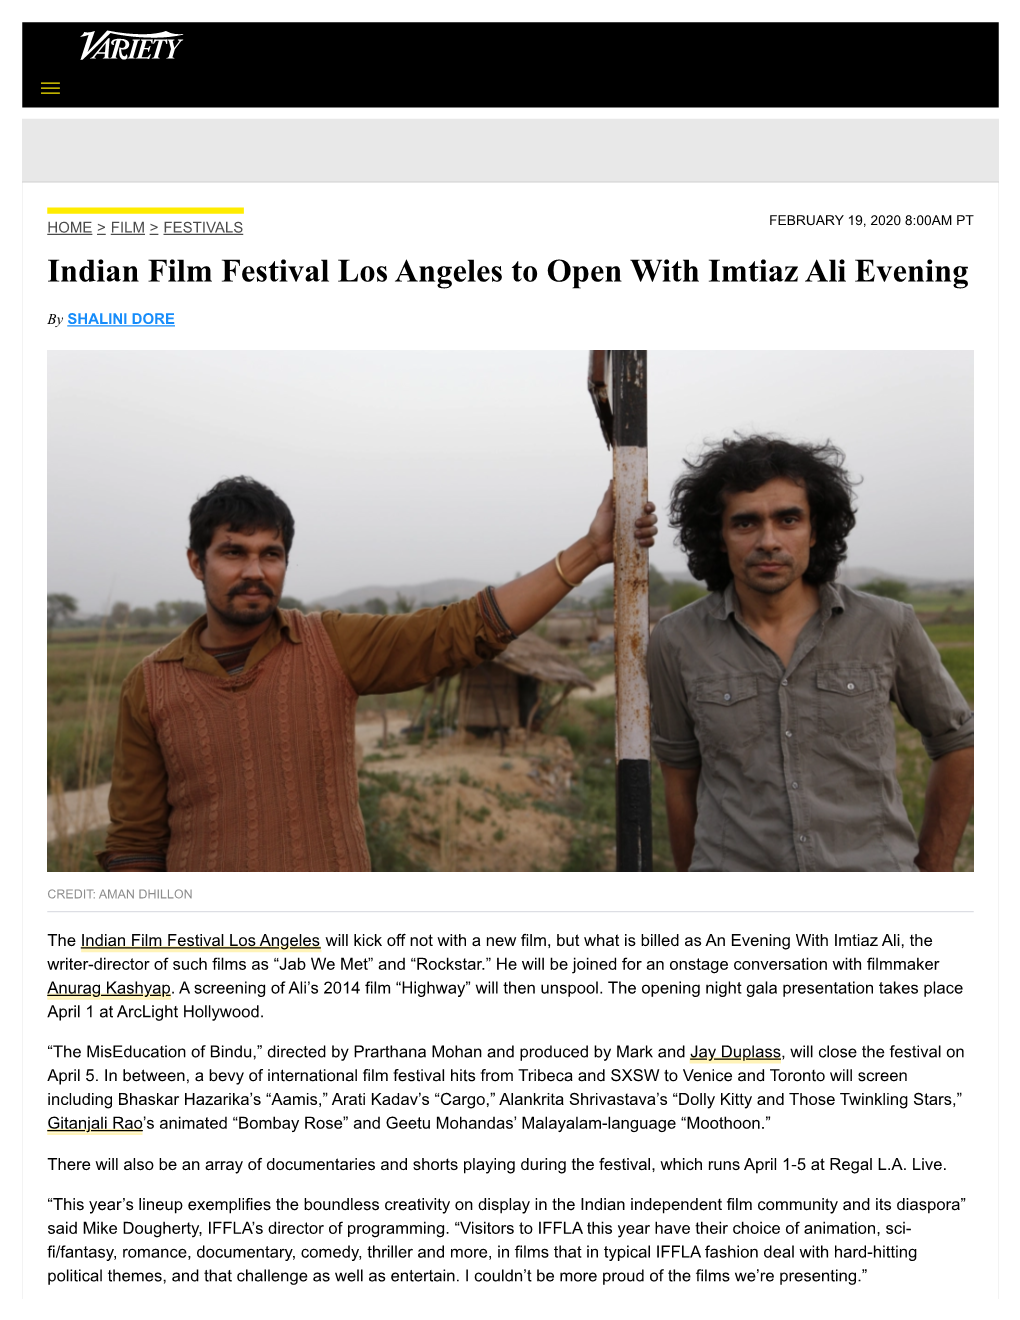 Indian Film Festival Los Angeles to Open with Imtiaz Ali Evening